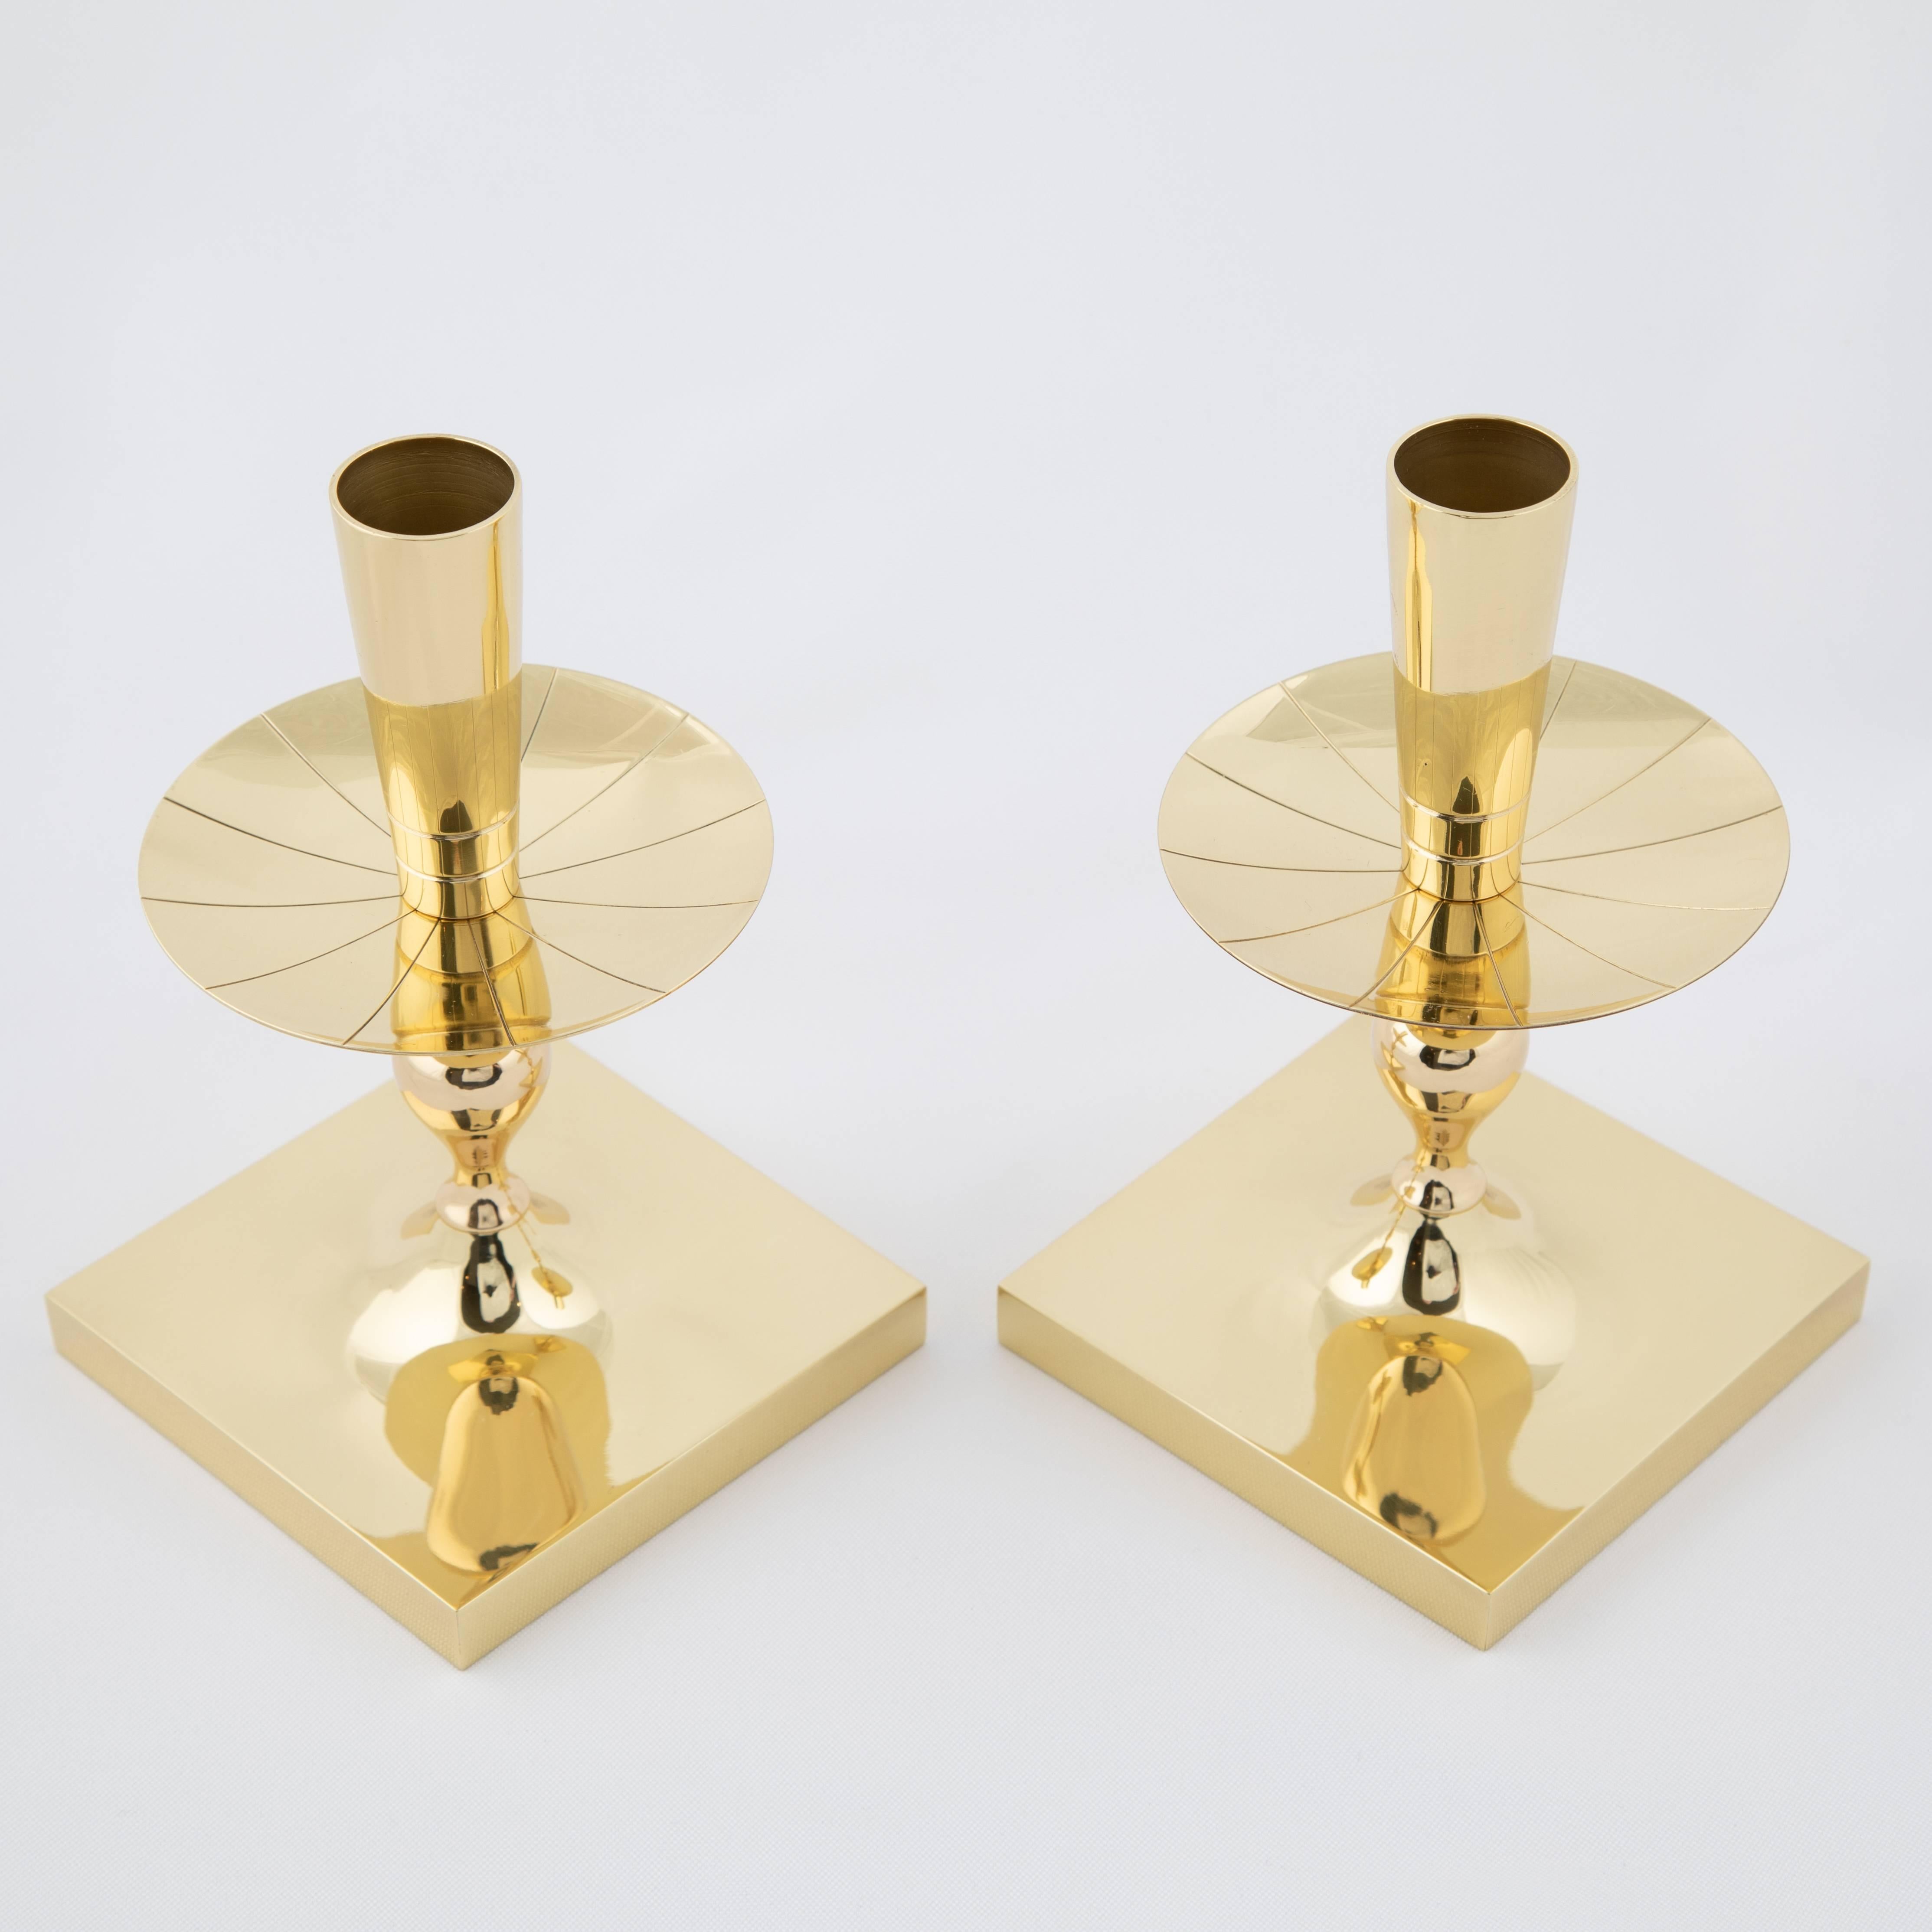 American Pair of Tommi Parzinger Brass Candleholders with Square Bases, circa 1950s For Sale